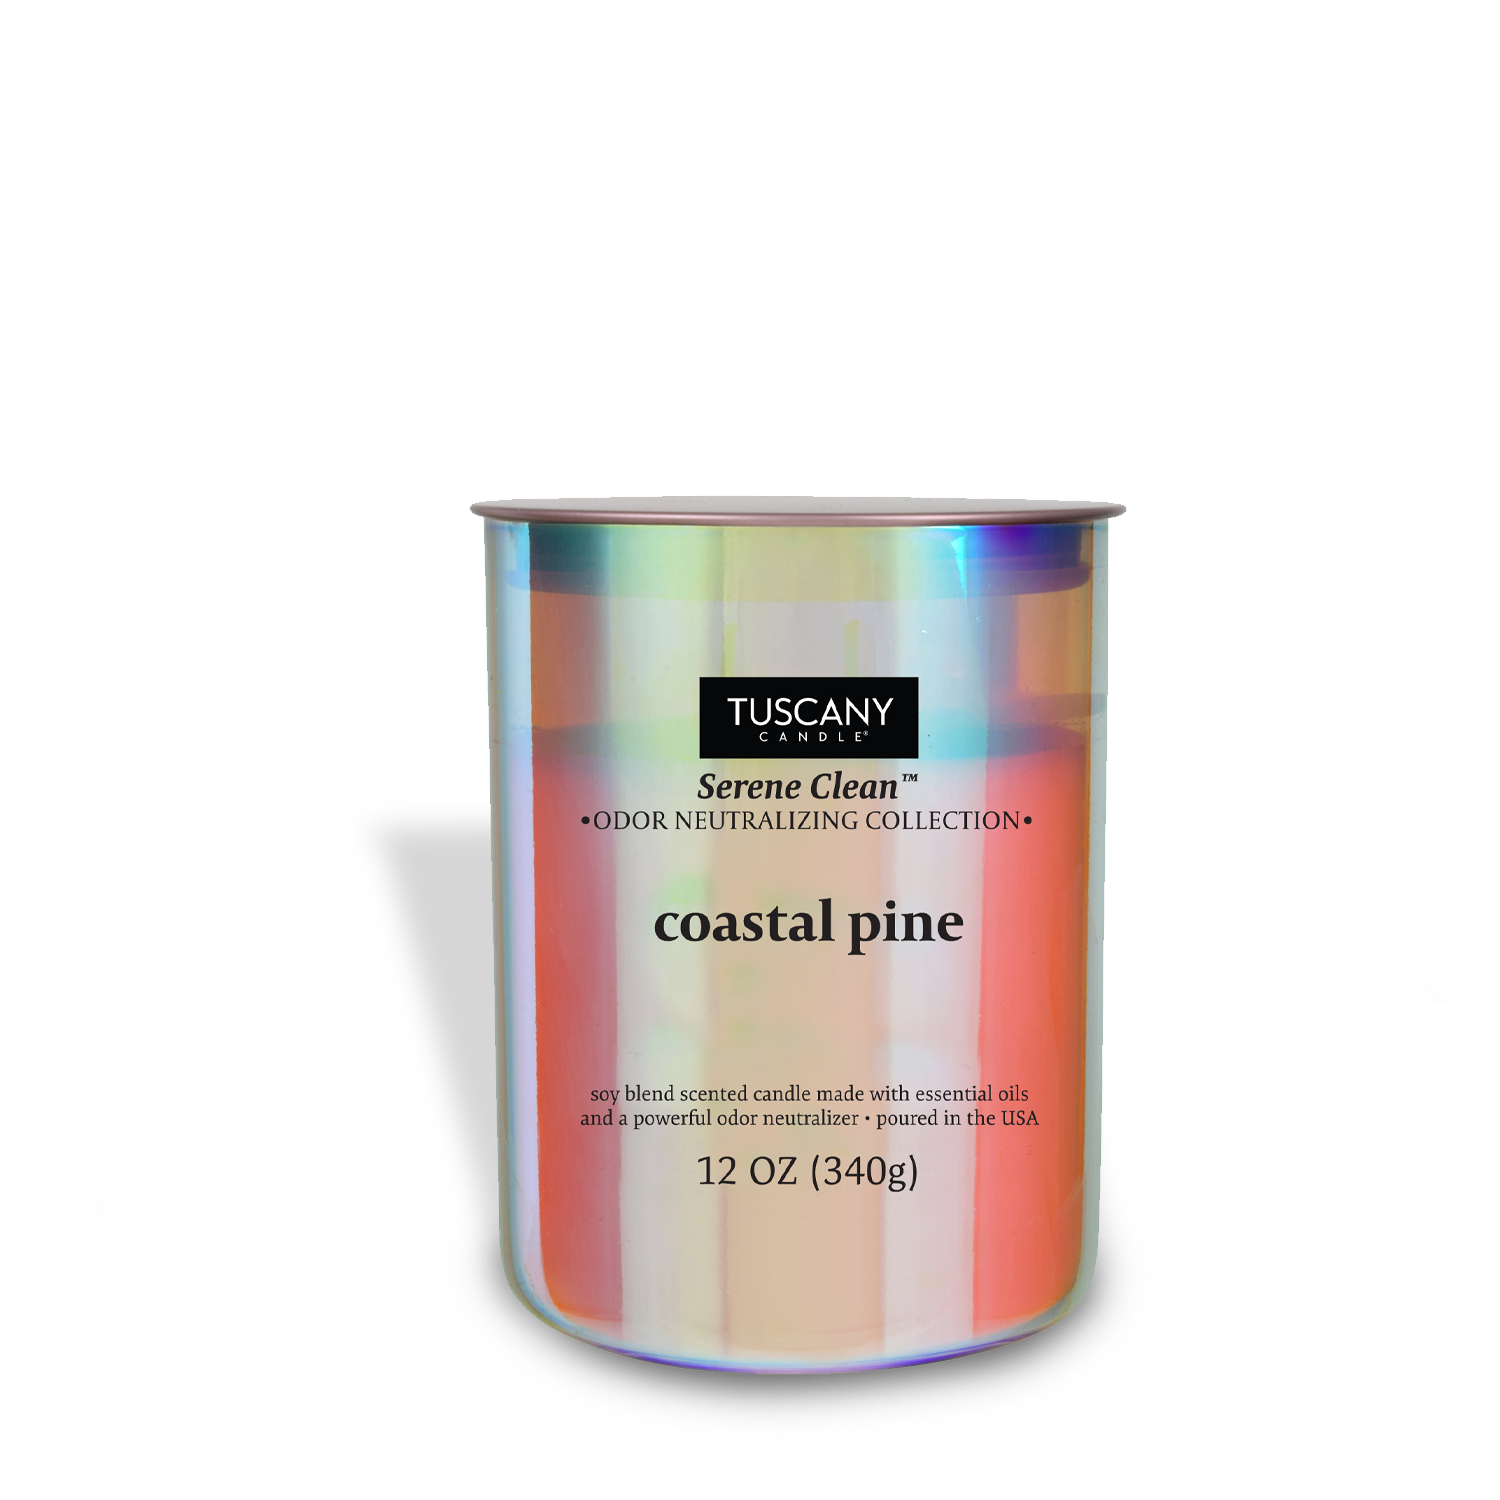 A close up of a Tuscany Candle® EVD Coastal Pine Scented Jar Candle (12 oz) – Serene Clean Collection.